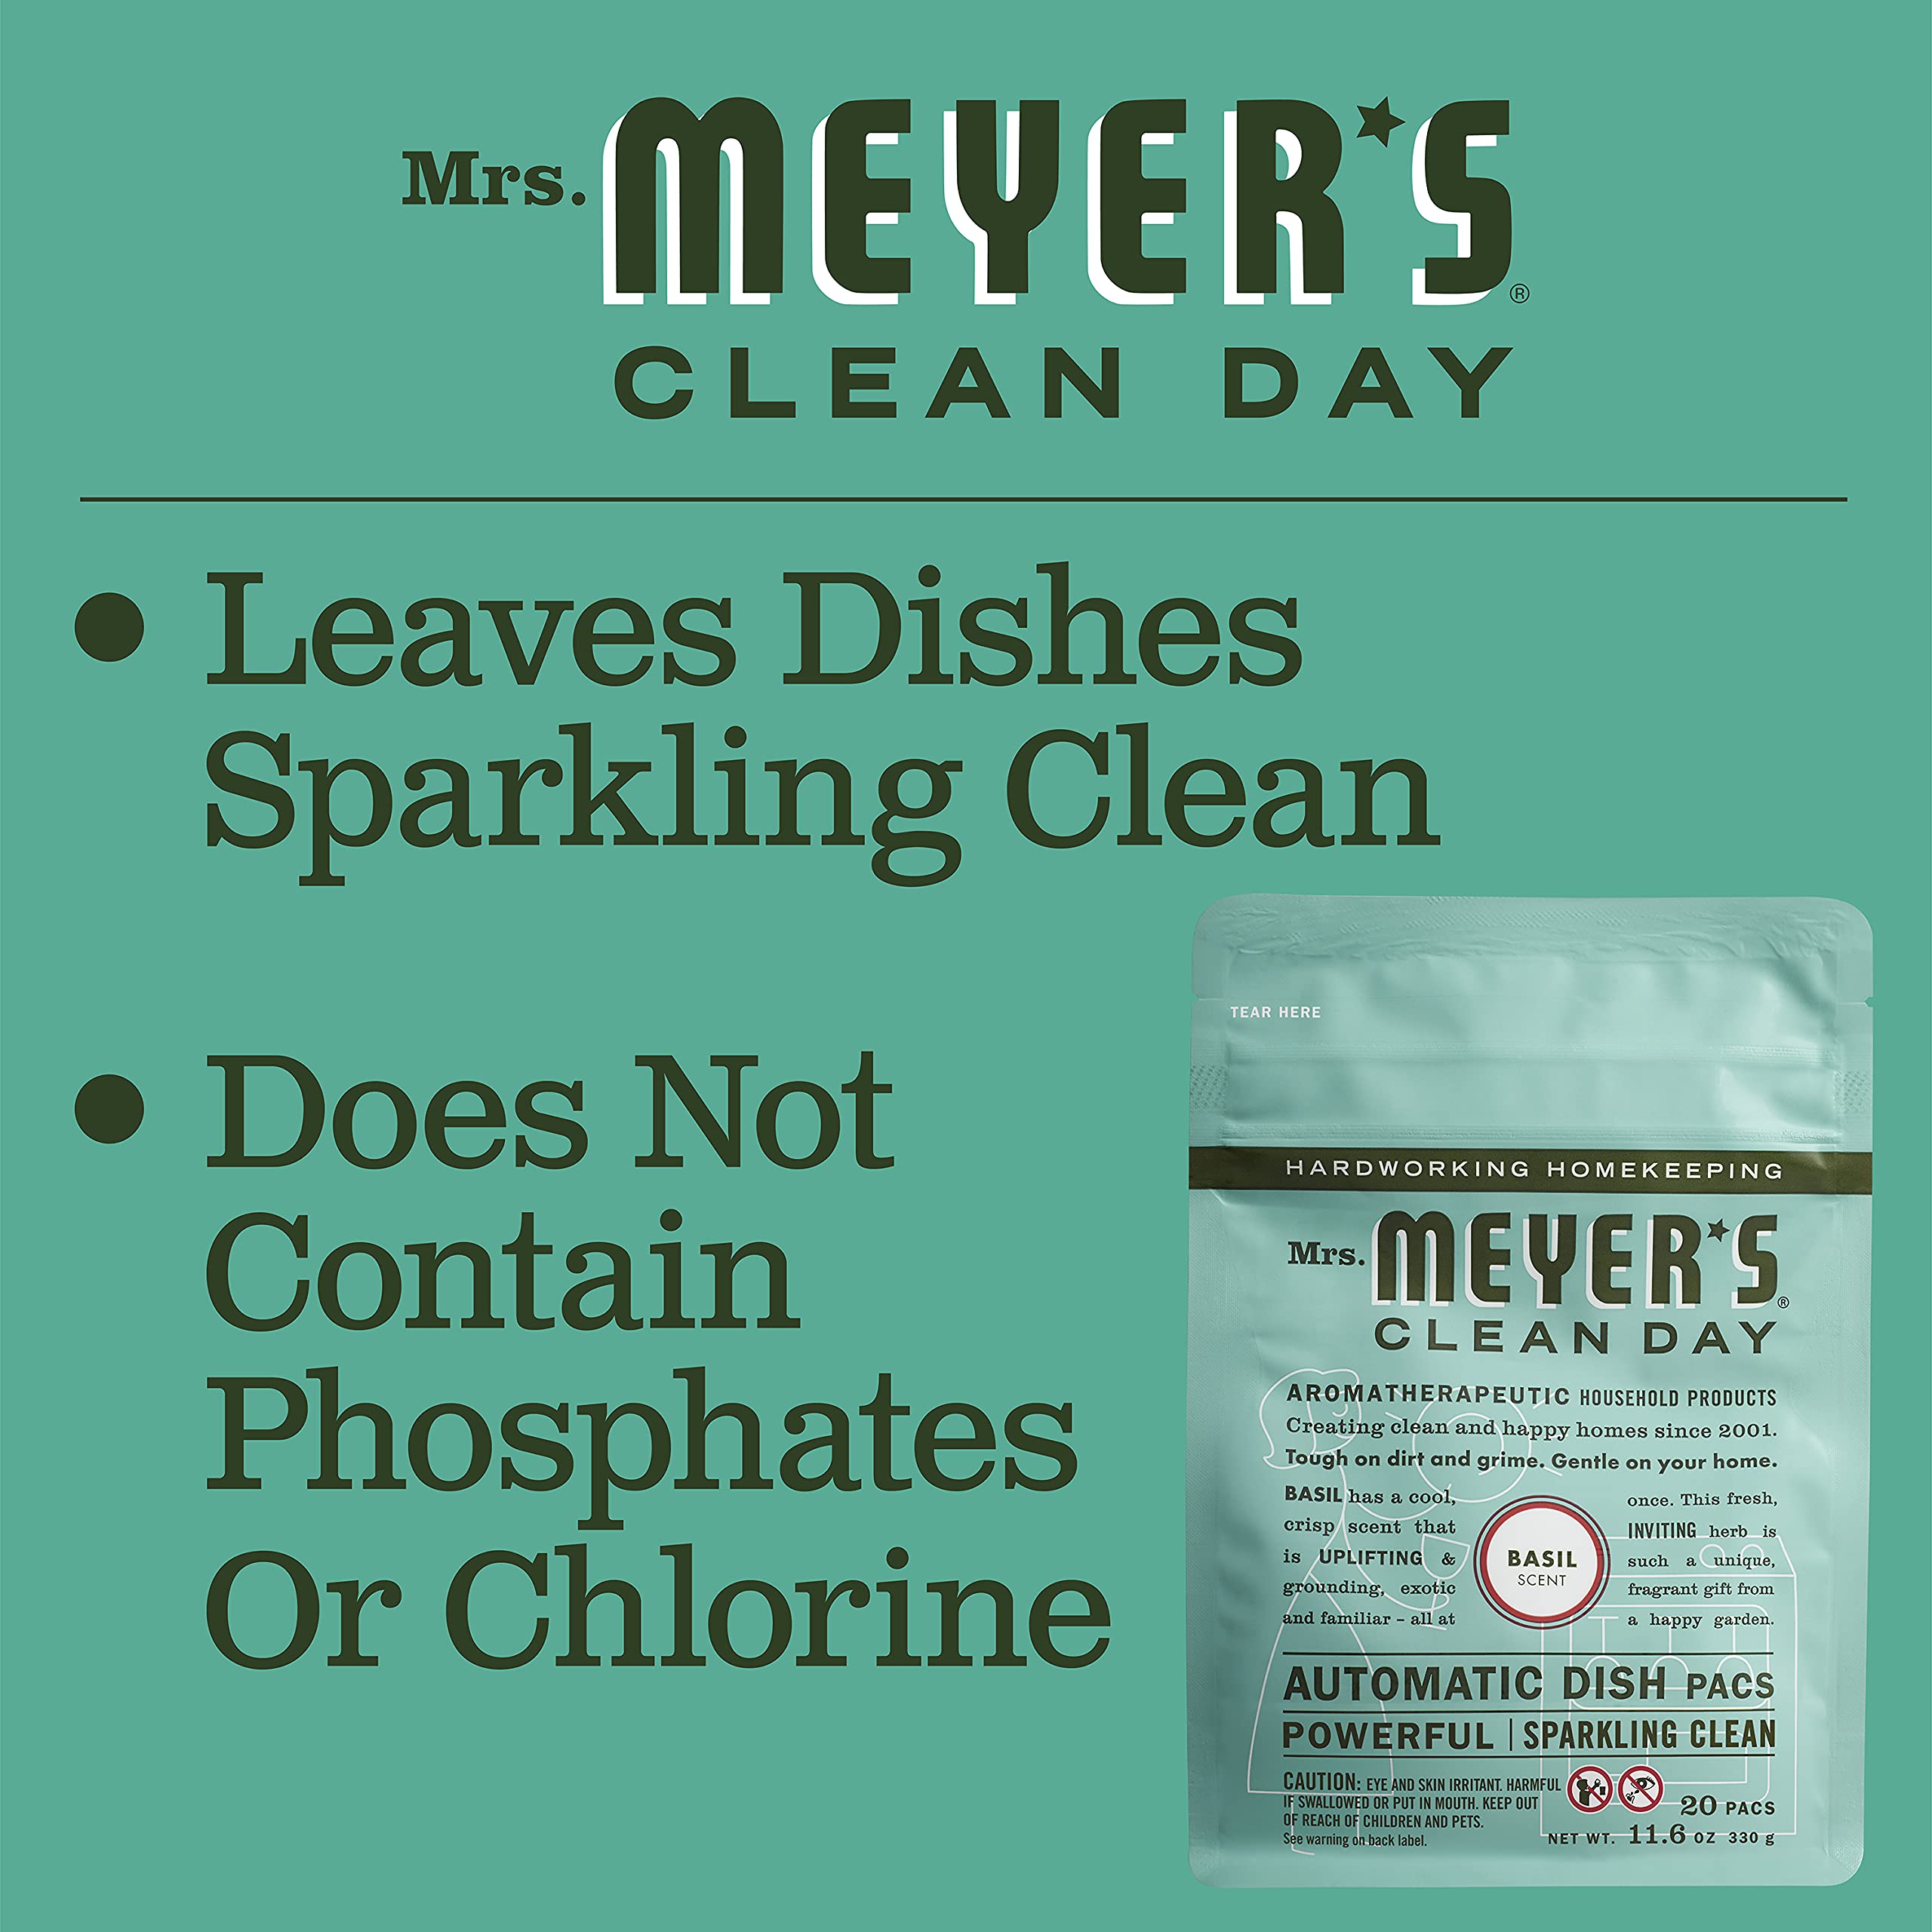 Mrs. Meyer's Clean Day Automatic Dish Pillow Basil Detergent Pods, 12.7 Oz. 20 Count